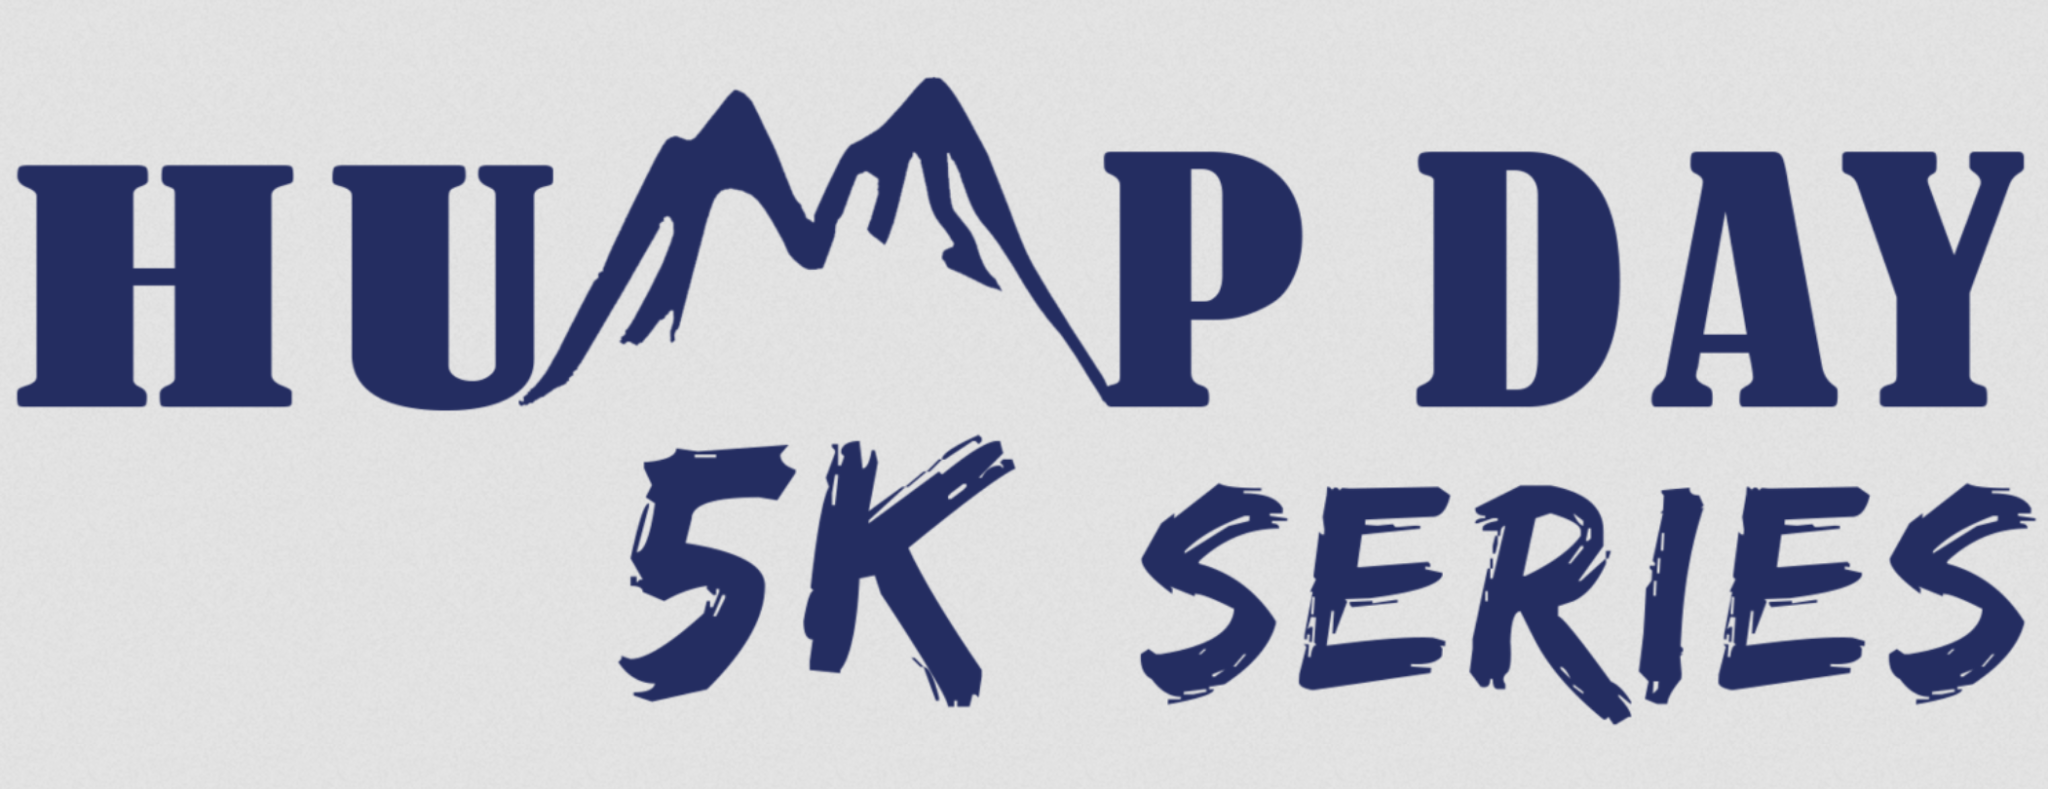 Hump Day 5K Summer Series May logo on RaceRaves